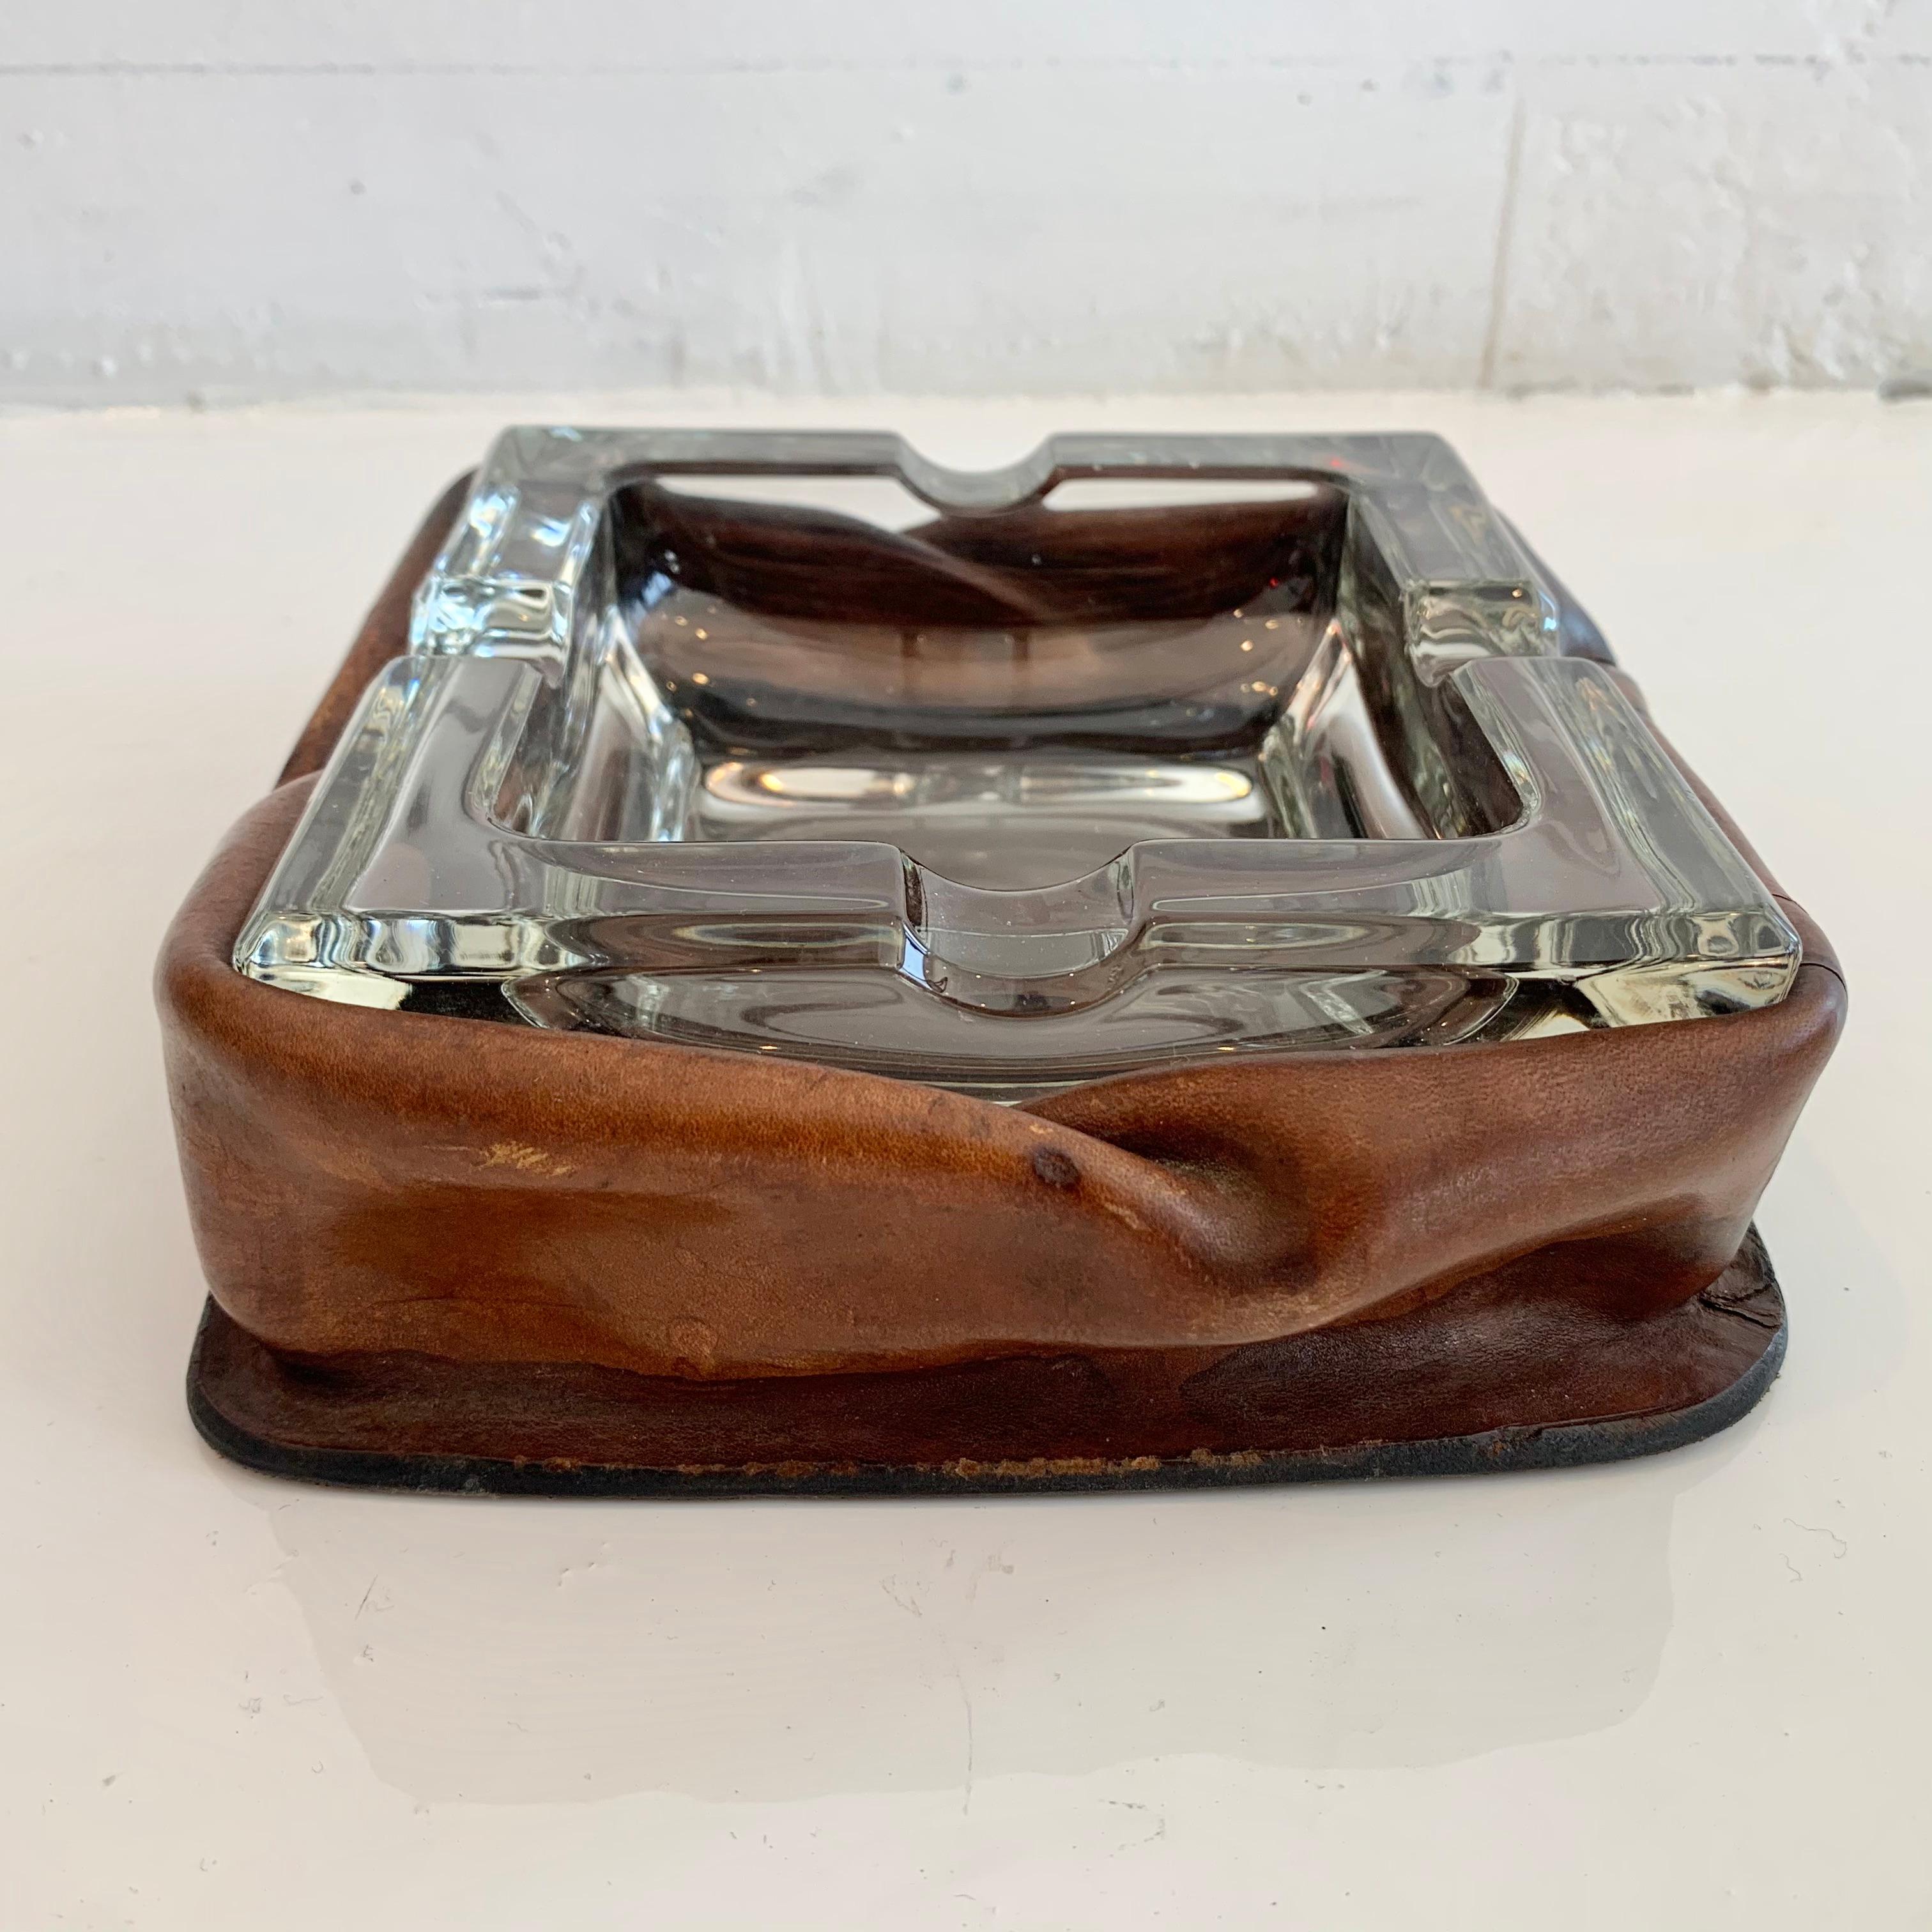 Unique leather and glass ashtray in the style of Jacques Adnet. Rouched saddle leather holds a square inset glass ashtray. Interesting design.